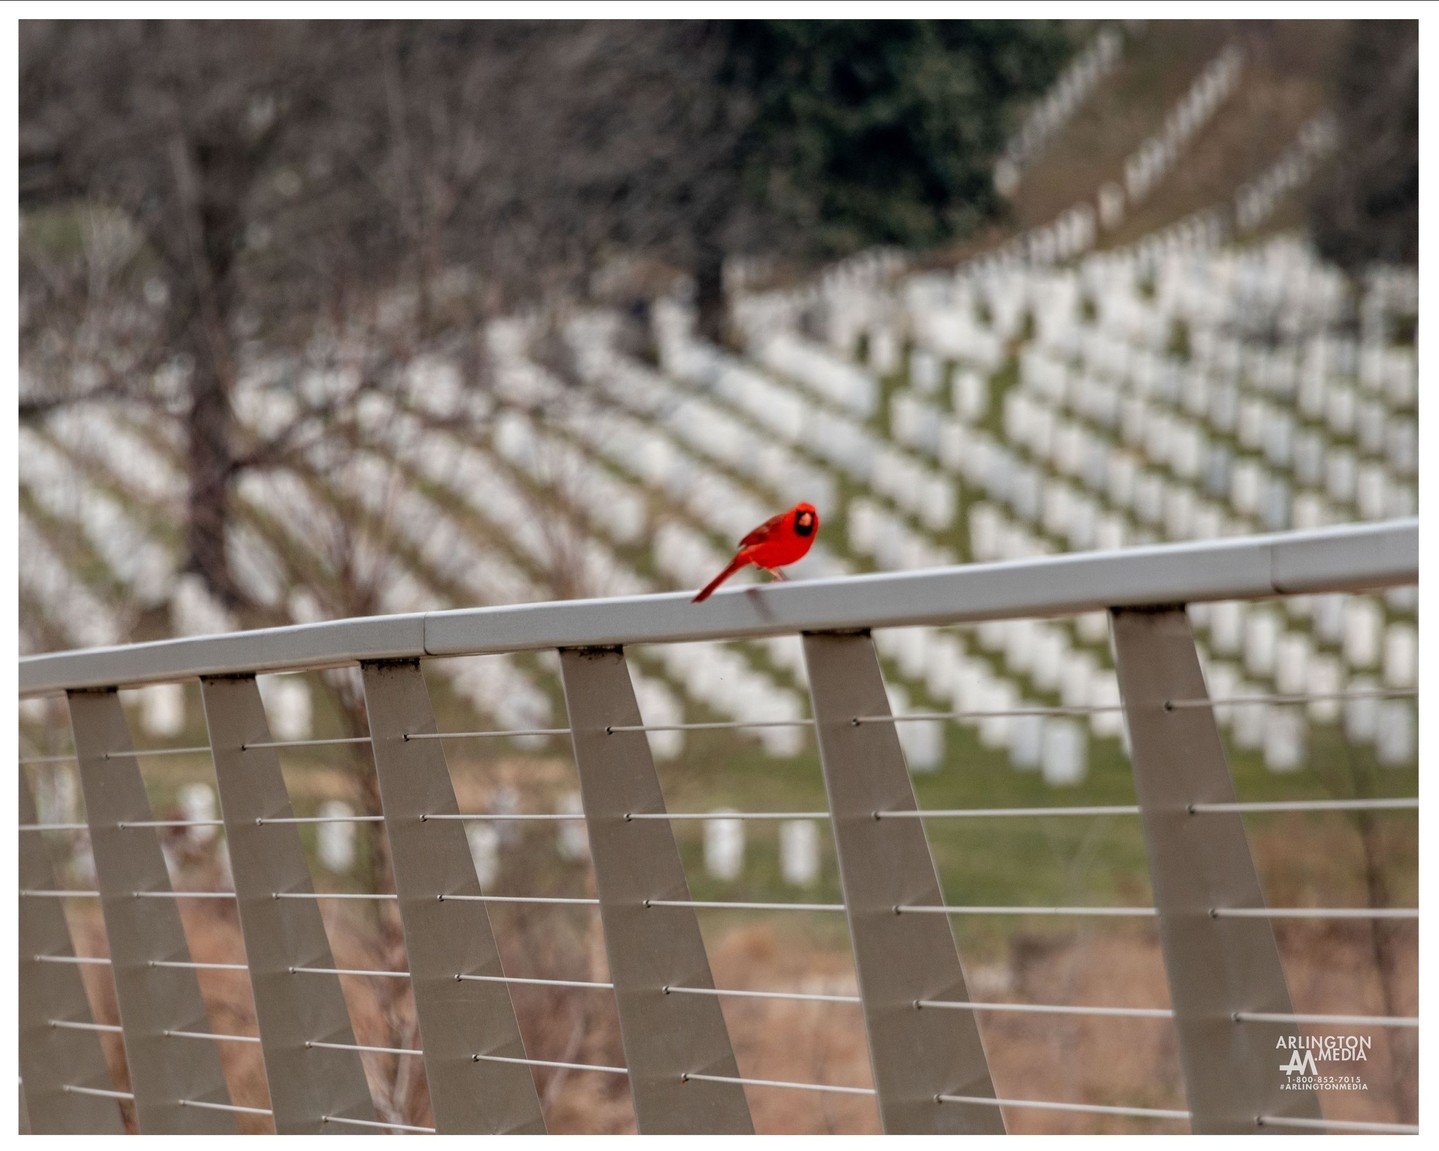 A cardinal perches atop the railing of the Millennium Project Section overlooking Section 28 of Arlington National Cemetery.

Section 28 is home to Memorial Tree which is the Vietnam Memorial Tree, titled, "No Greater Love". No Greater Love is a Red Maple (Acer rubrum) native to the United States and covers this section with its beautiful leaves each fall.

The grounds of Arlington National Cemetery feature 142 Memorial Trees, which serve as living memorials that commemorate military units and battles, veterans, families and others who serve. Many were dedicated by U.S. presidents, visiting dignitaries or representatives from service organizations. Thirty-six are Medal of Honor trees, each a descendent of a historic tree.